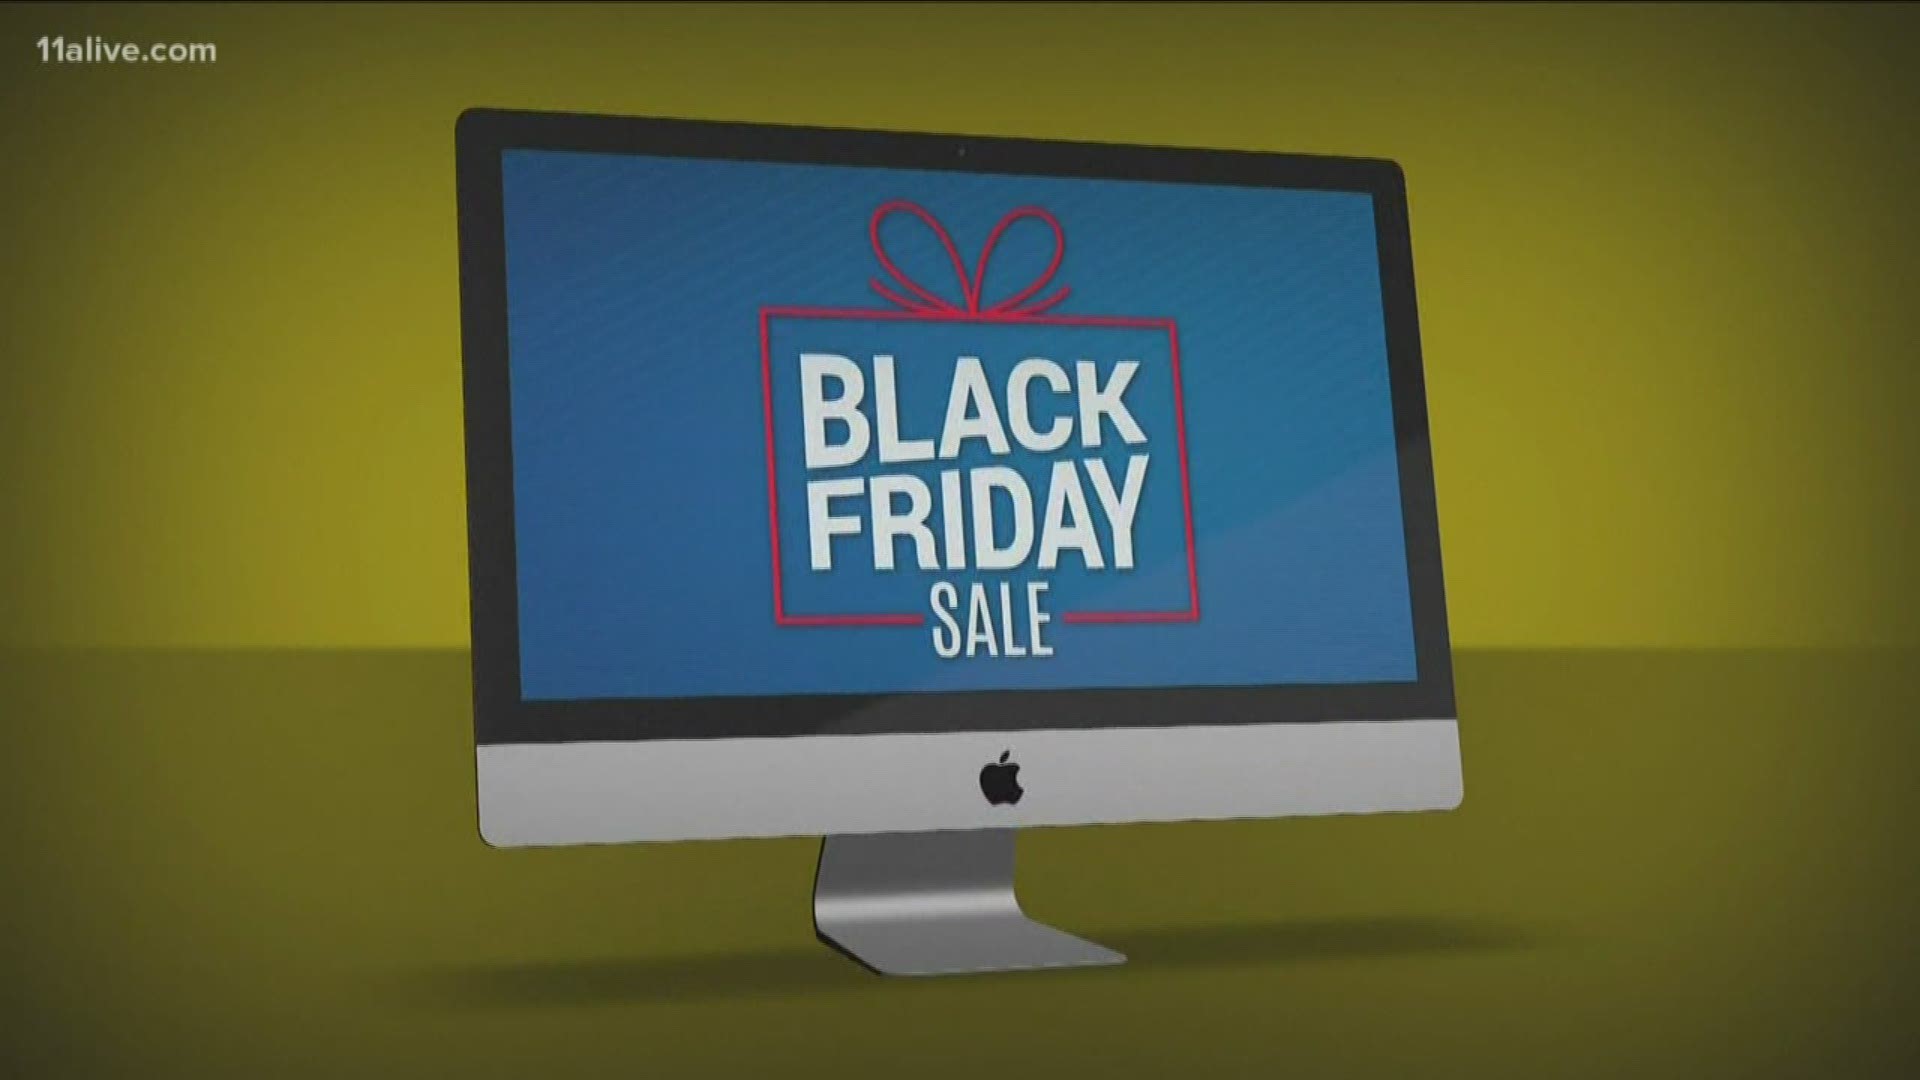 Retailers expect to dish out some high discounts on Cyber Monday.